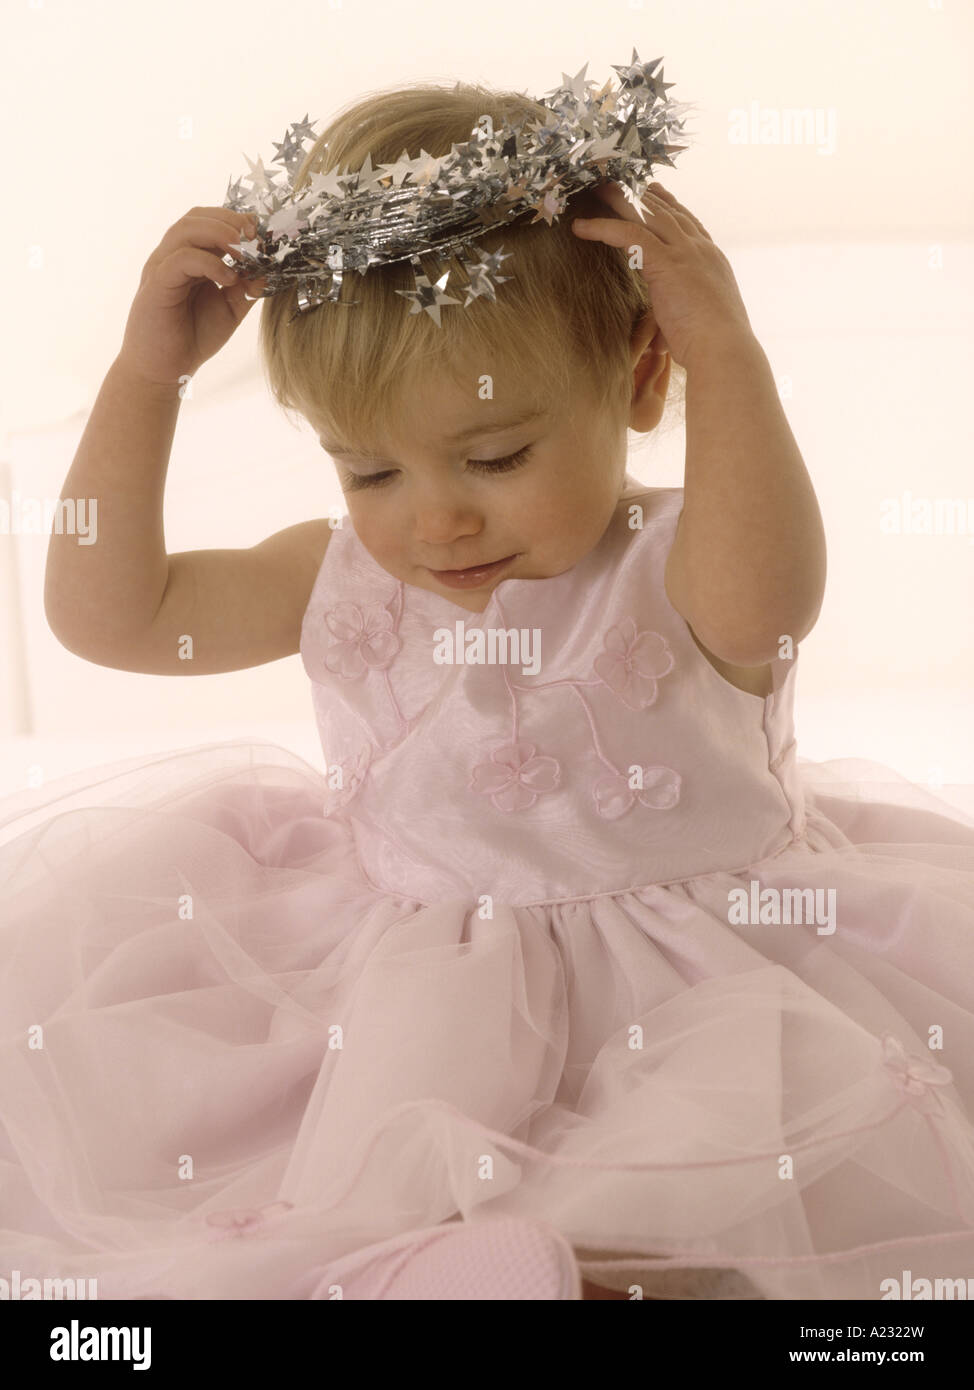 Toddler wearing a pink party dress looking at a tinsel halo Stock Photo